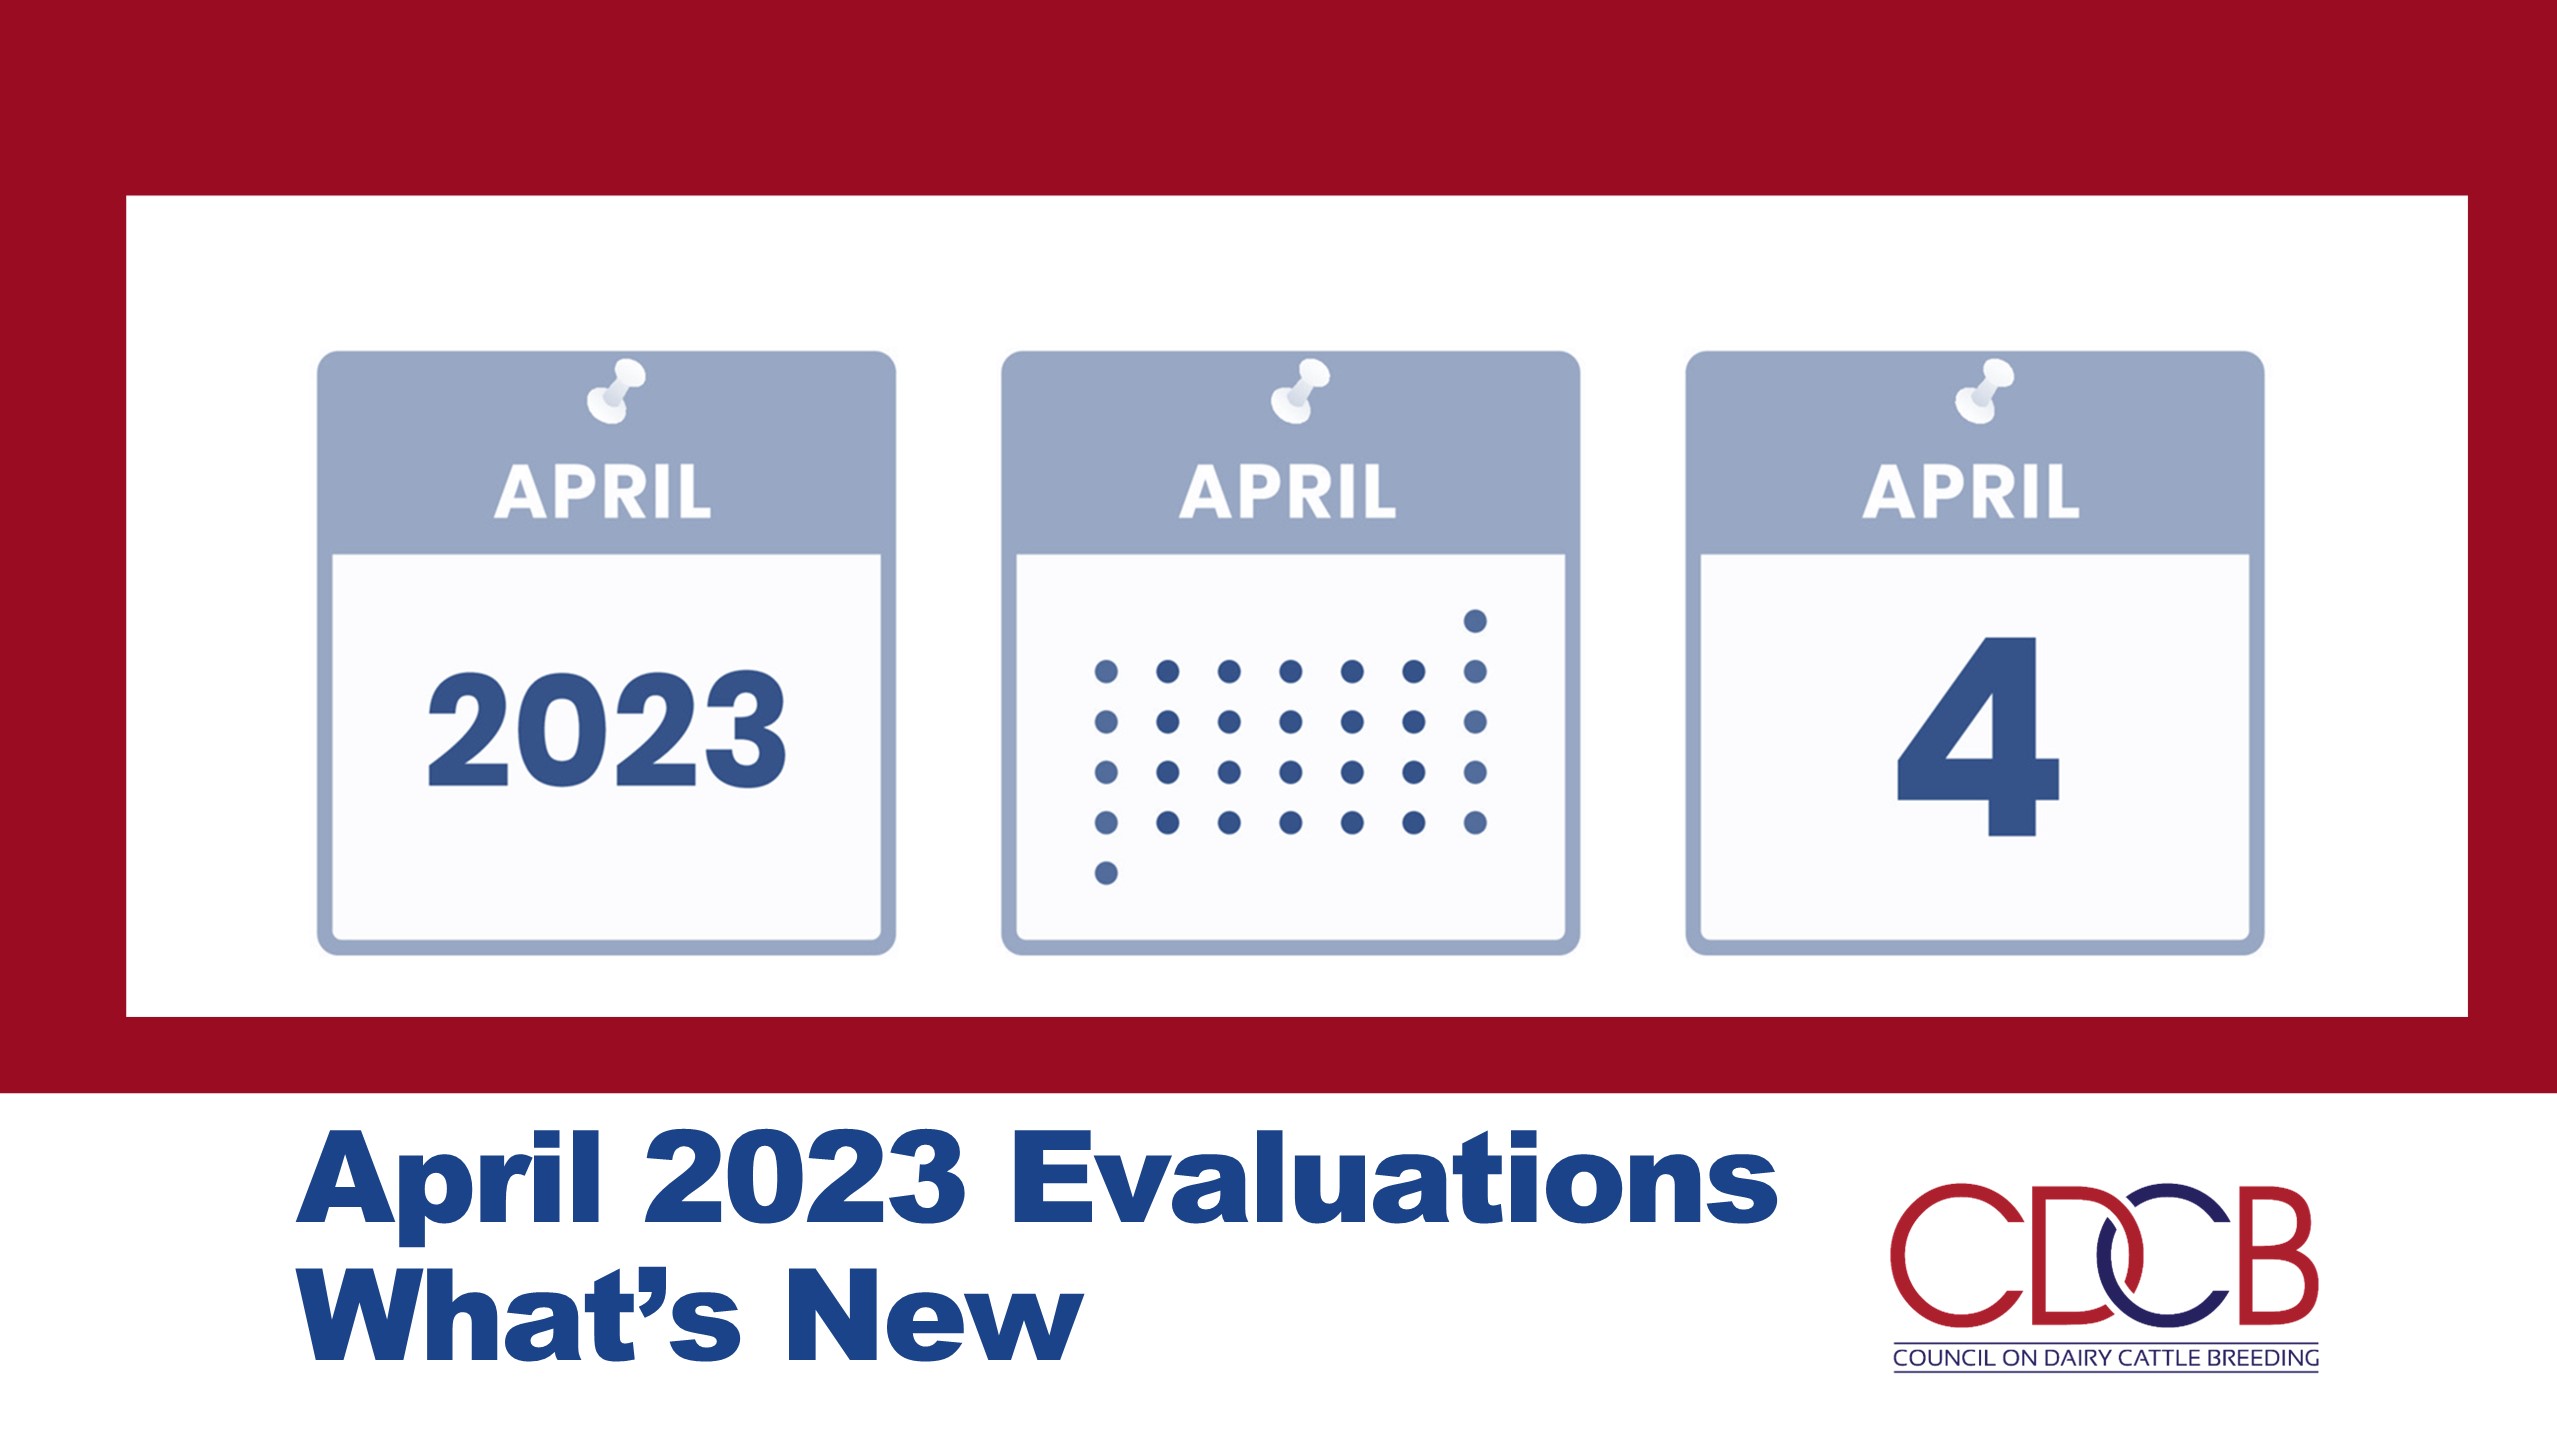 <strong>April 2023 Evaluation Changes: What’s New?</strong>